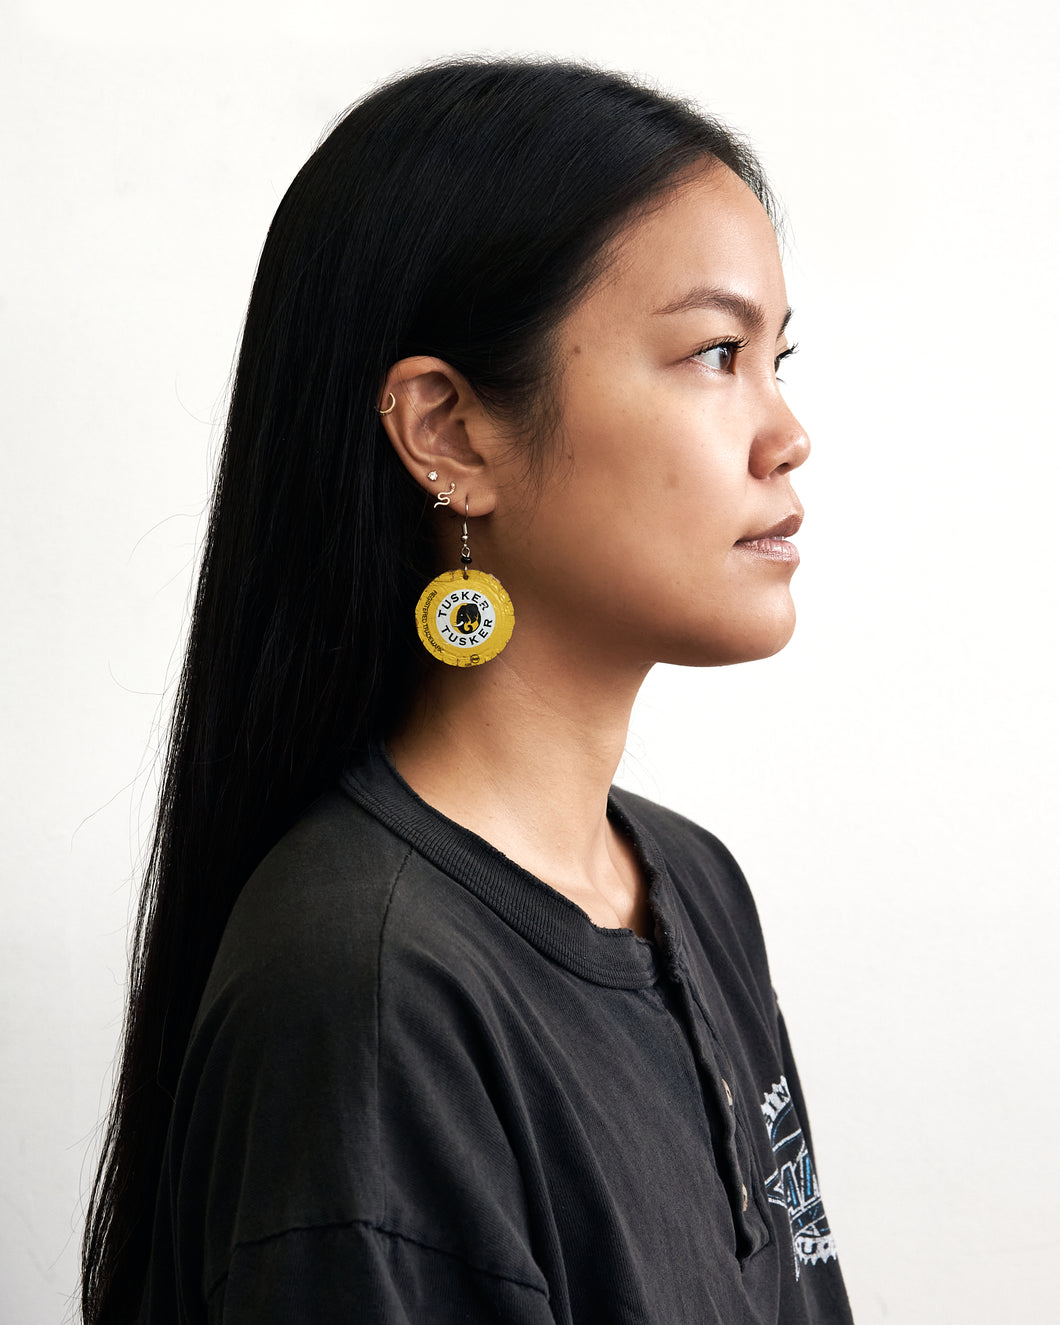 Tusker Up-Cycled Earrings